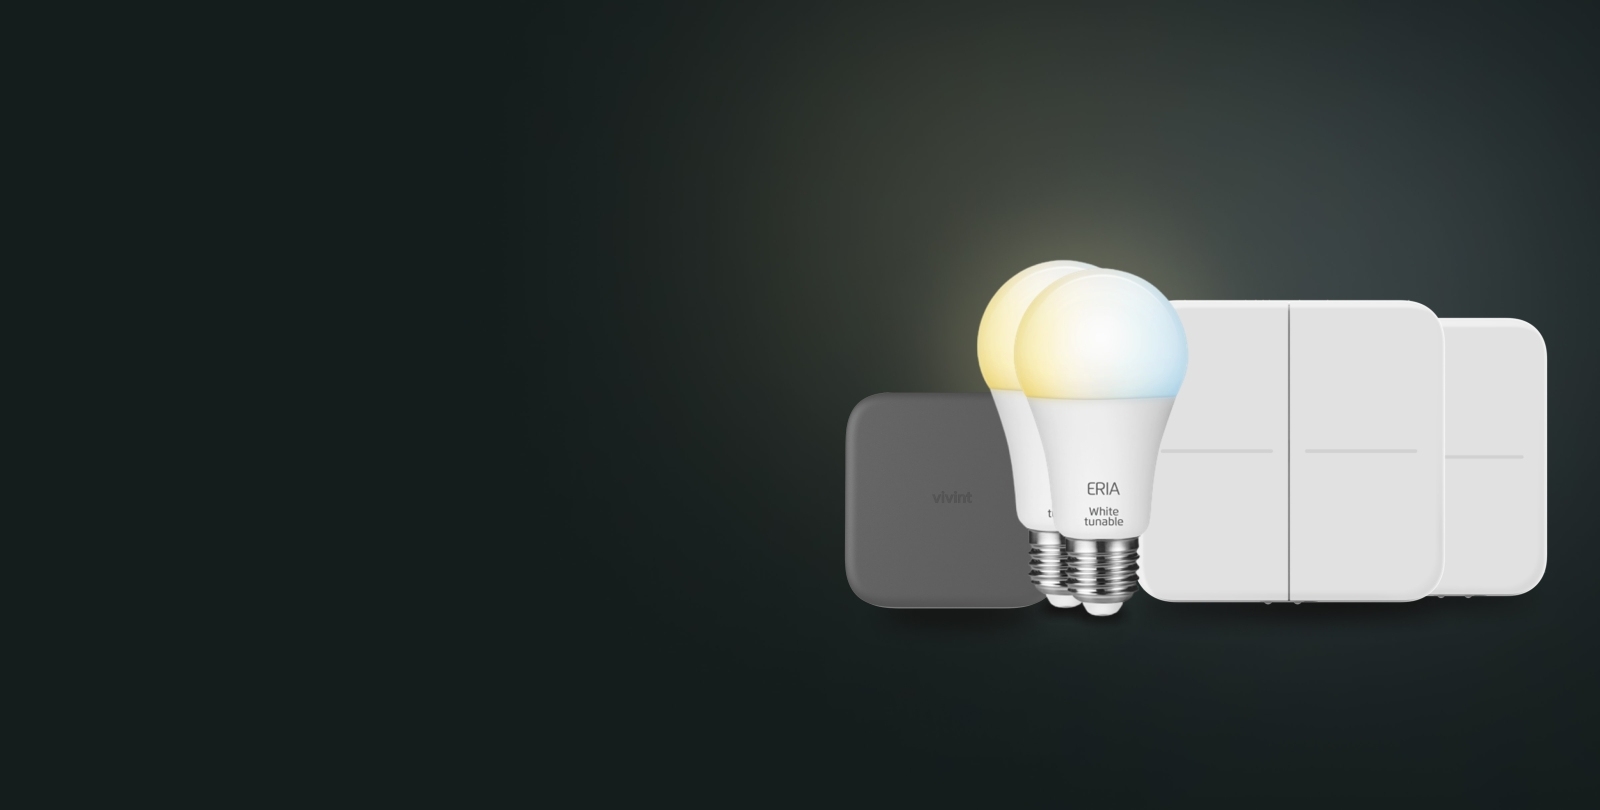 Vivint smart lighting products image with a dark background